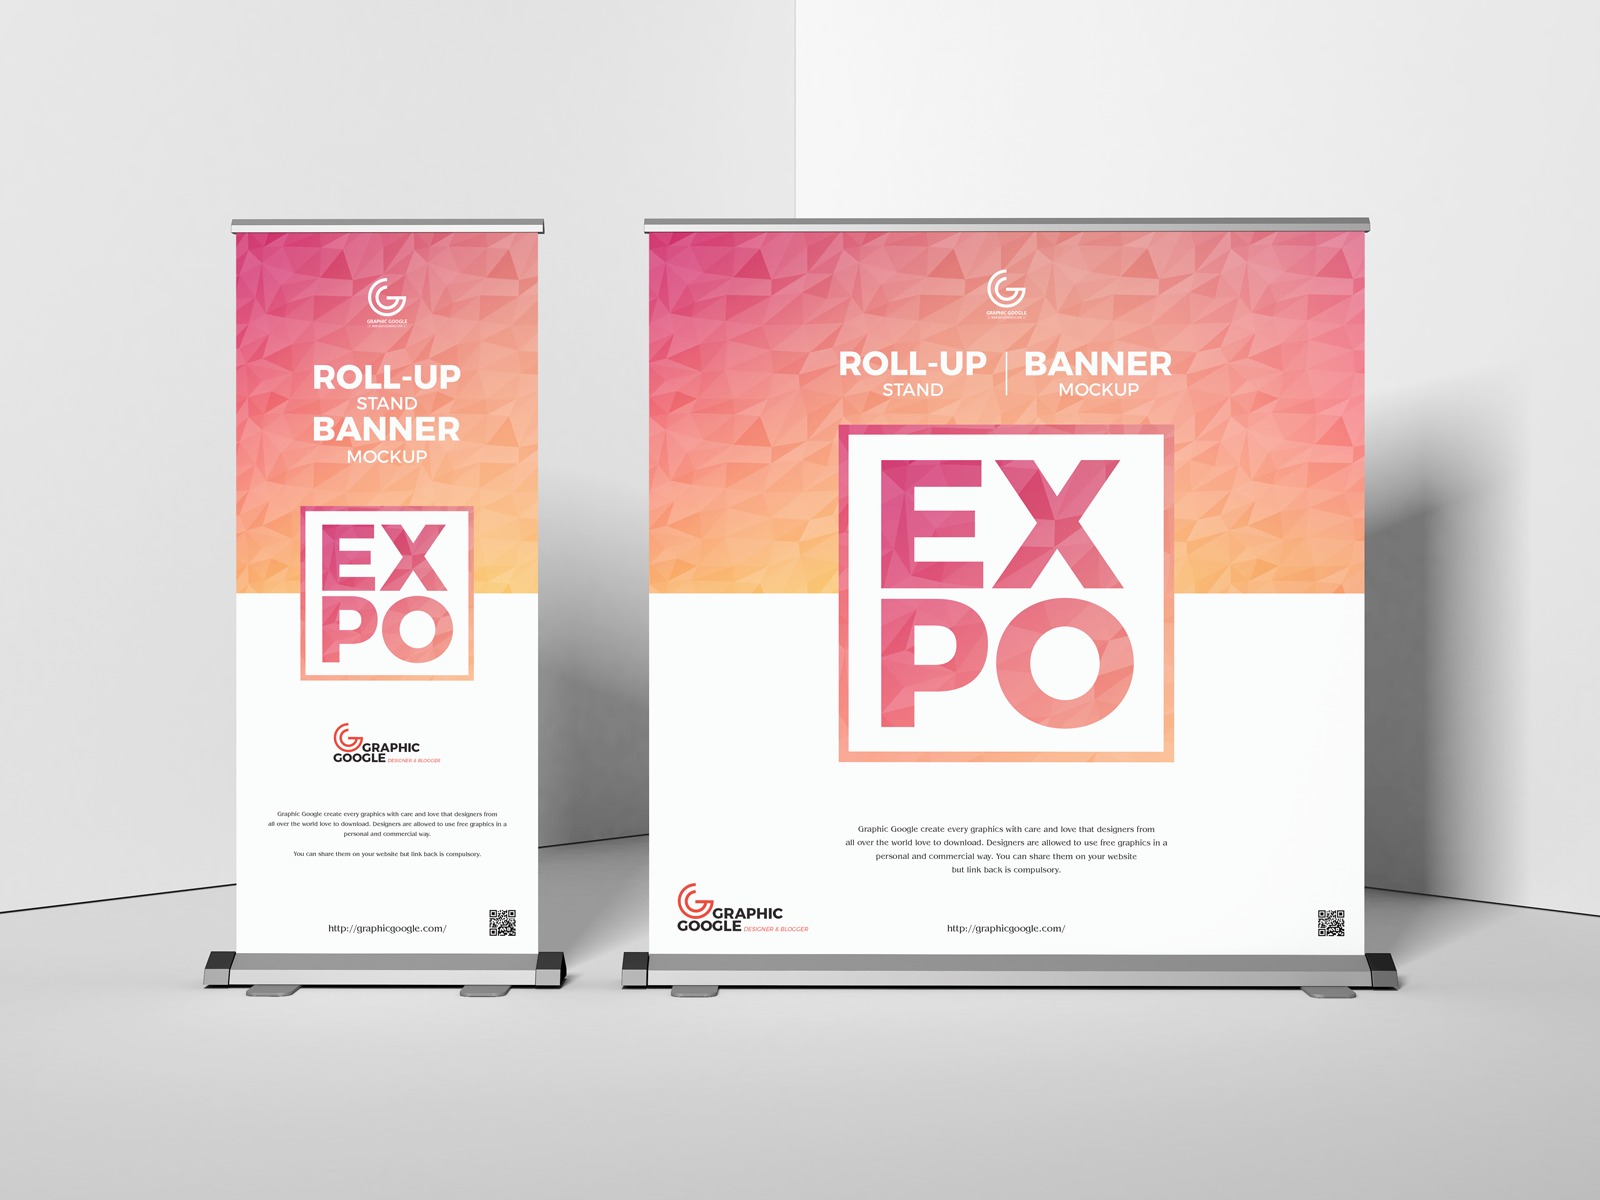 Download Free Expo Roll Up Stand Banner Mockup By Graphic Google On Dribbble PSD Mockup Templates